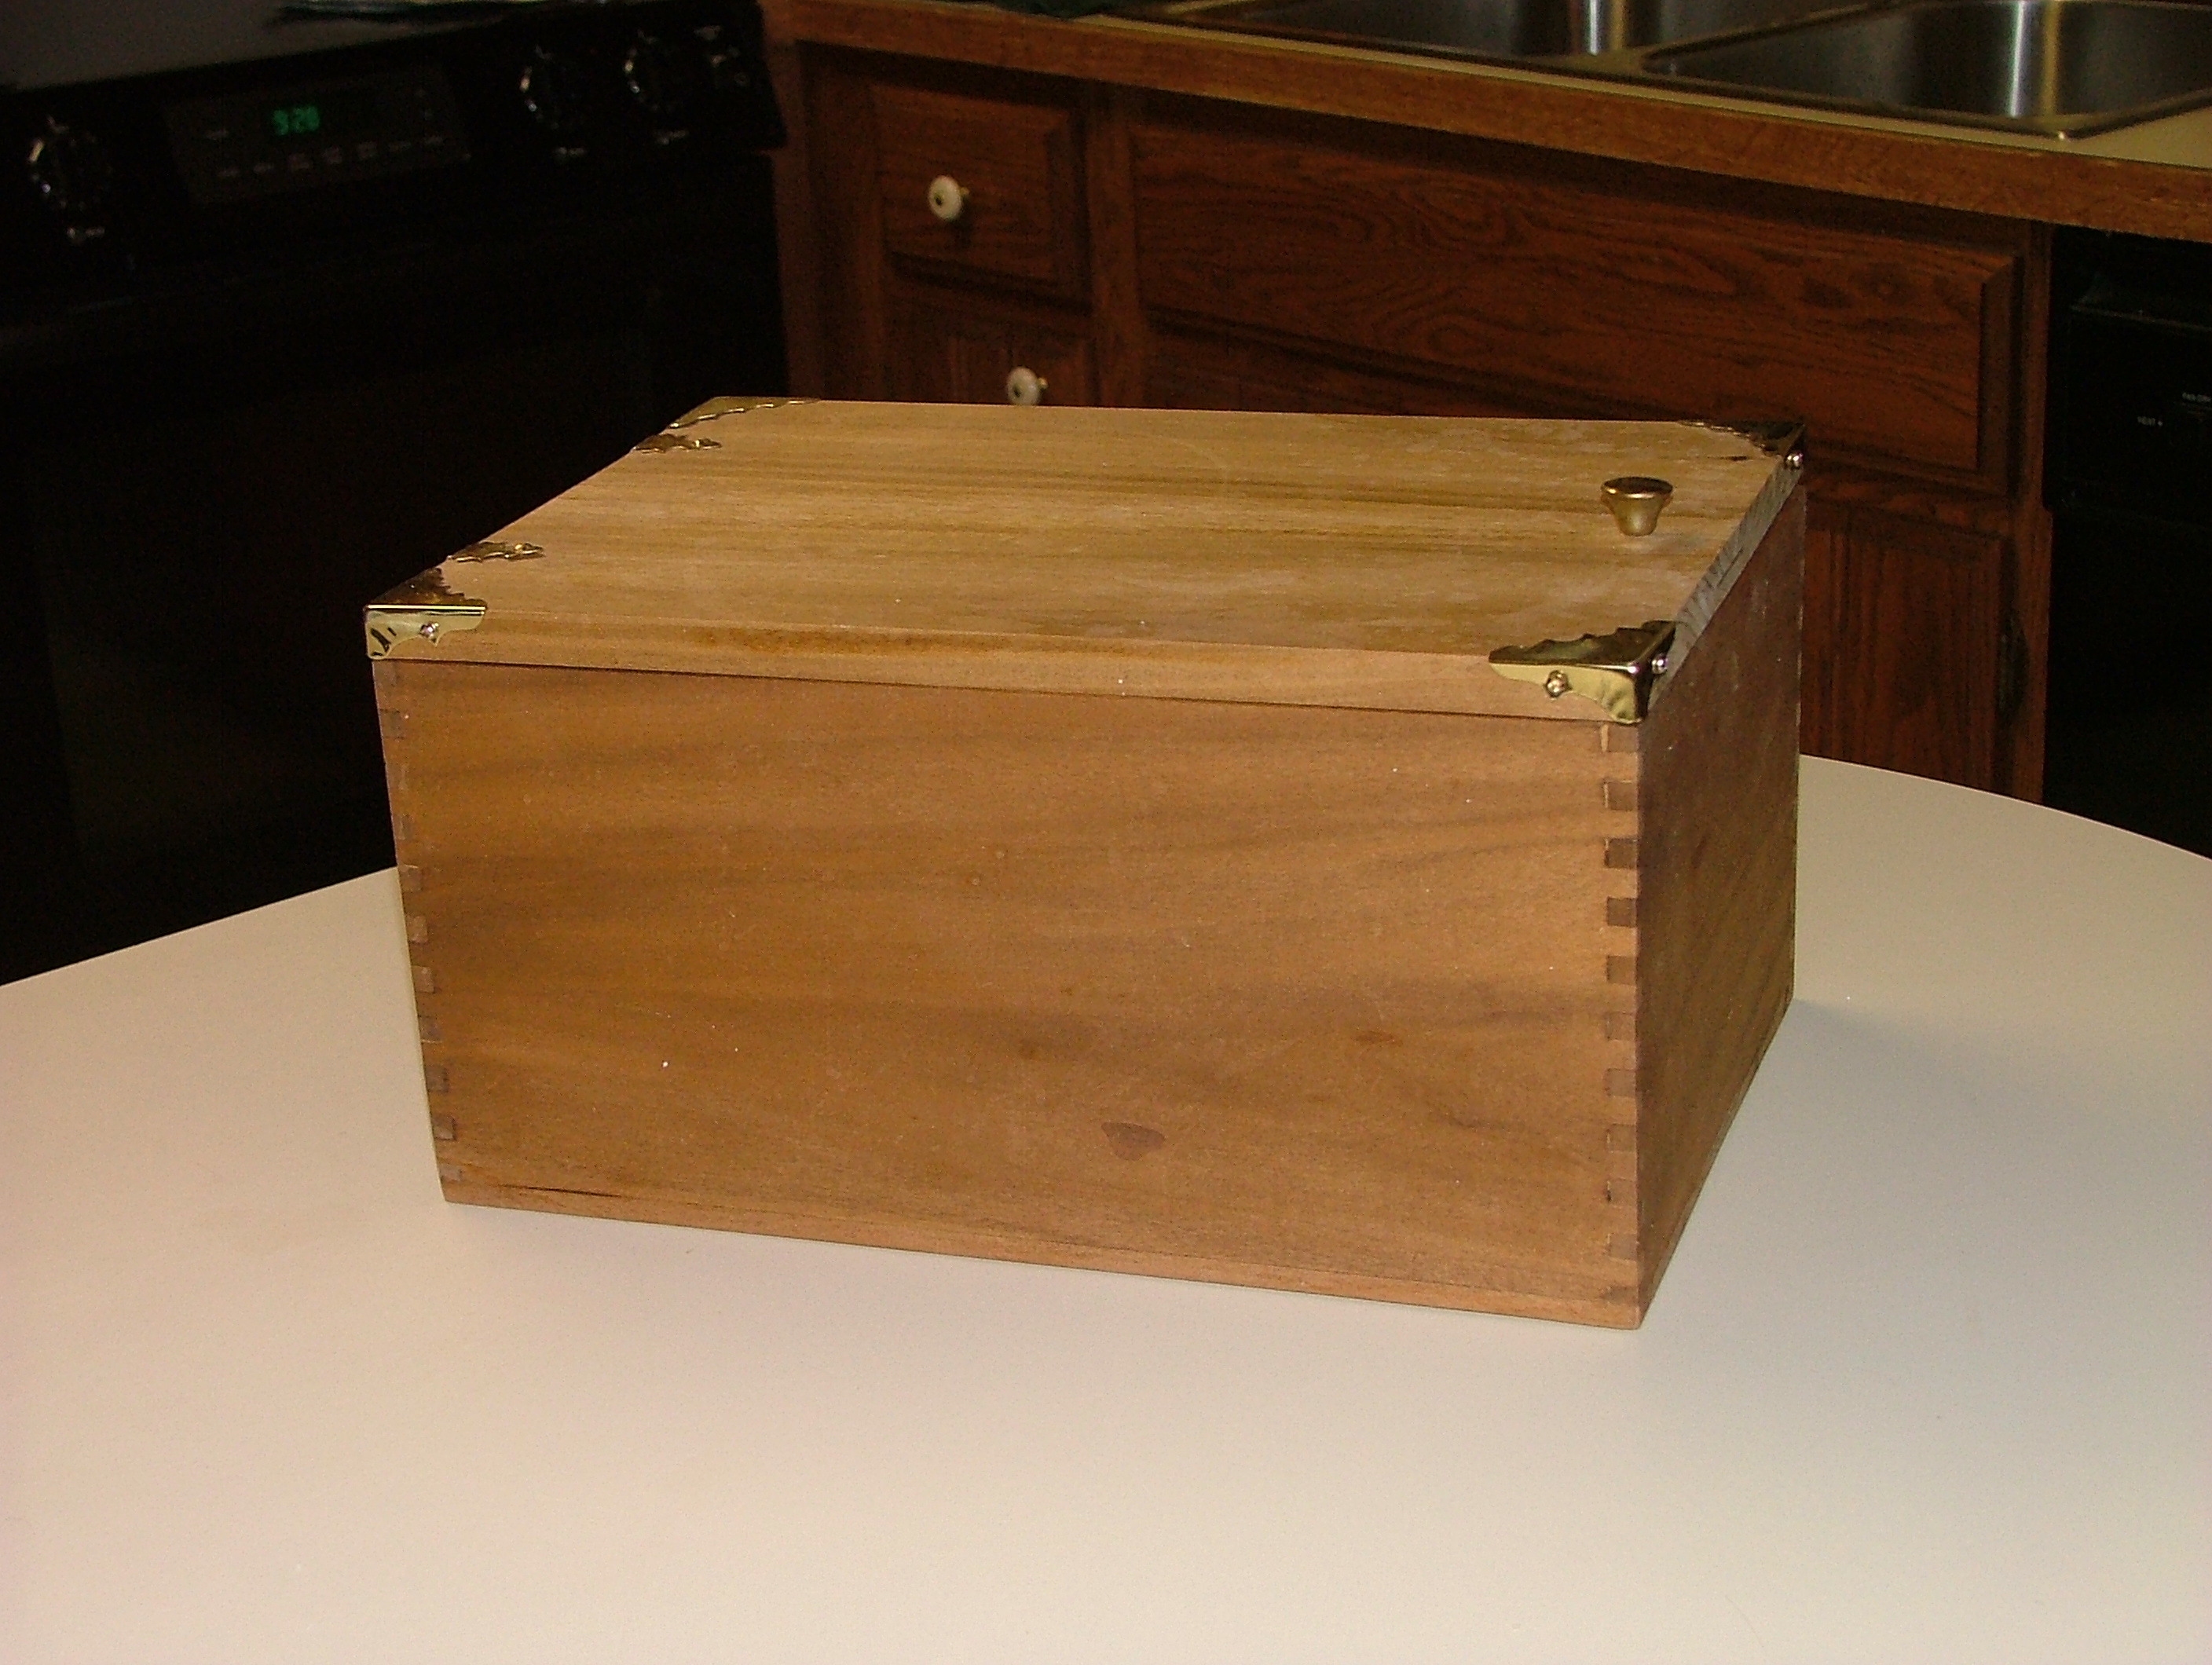 Recipe Box for my wife.